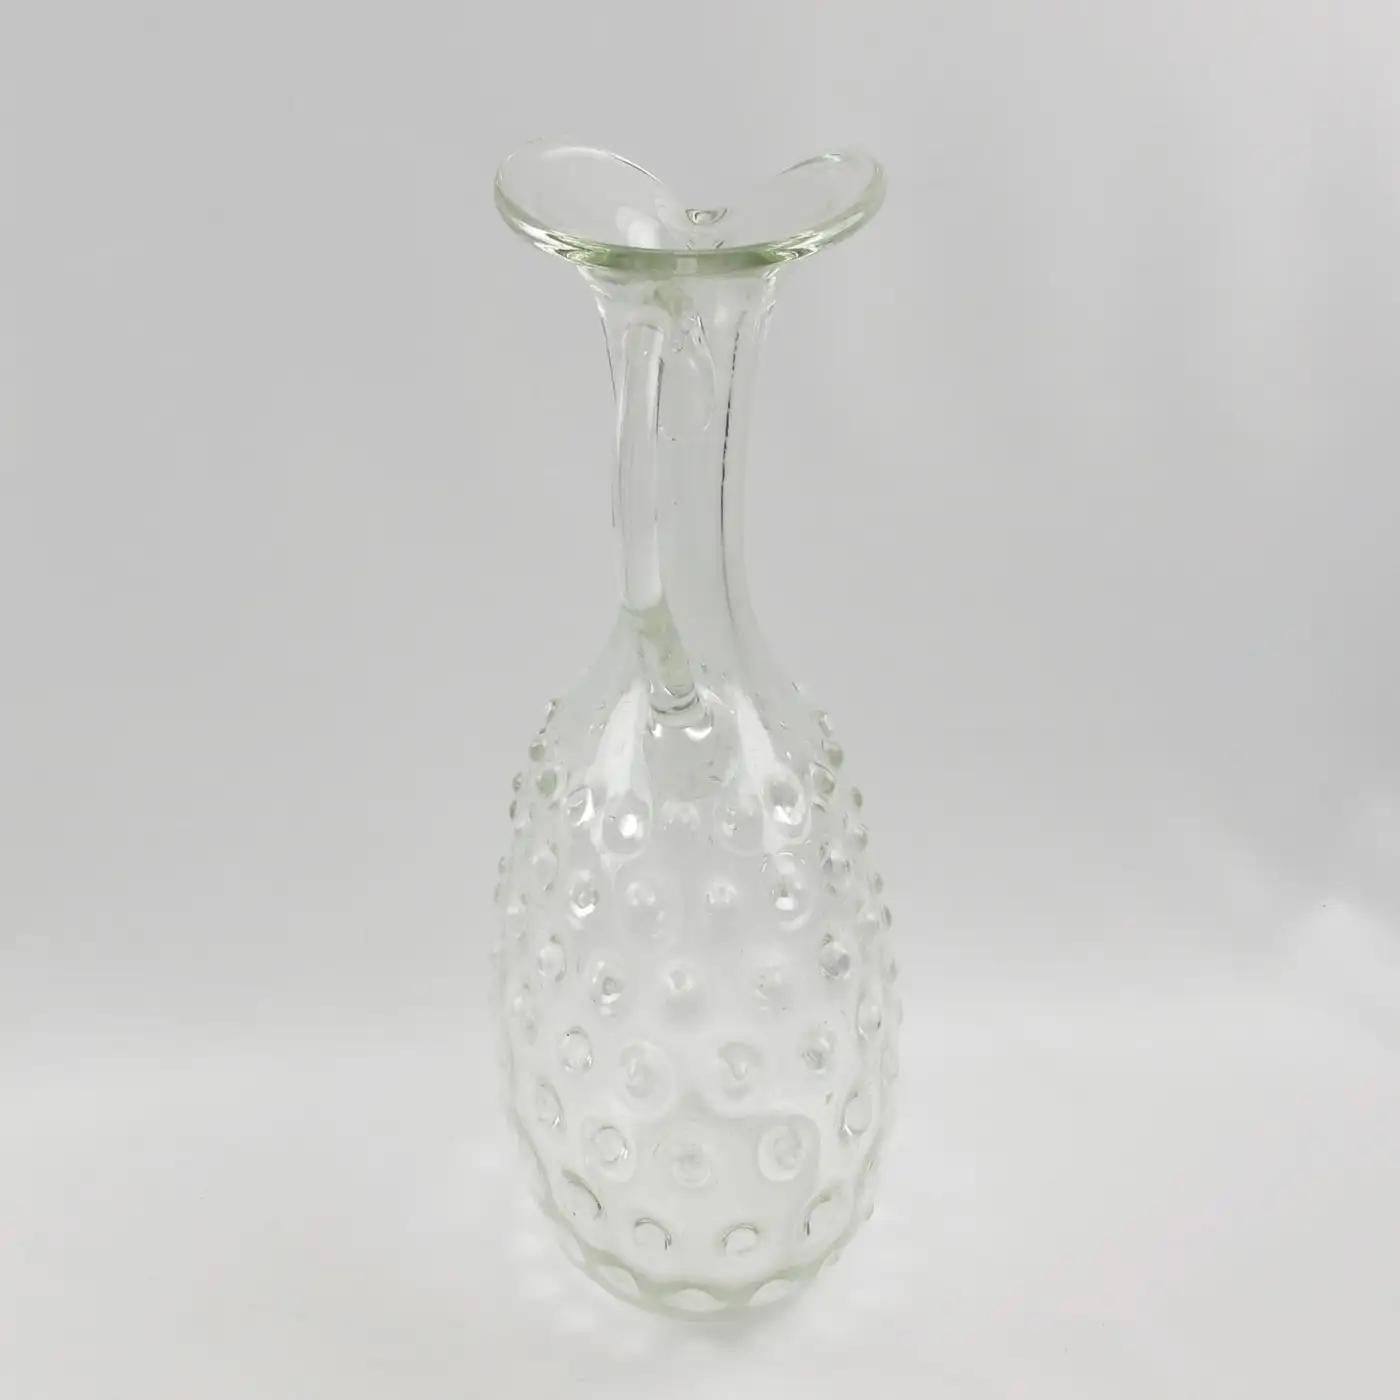 Empoli, Italy Hand Blown Art Glass Pitcher Decanter, 1950s For Sale 1